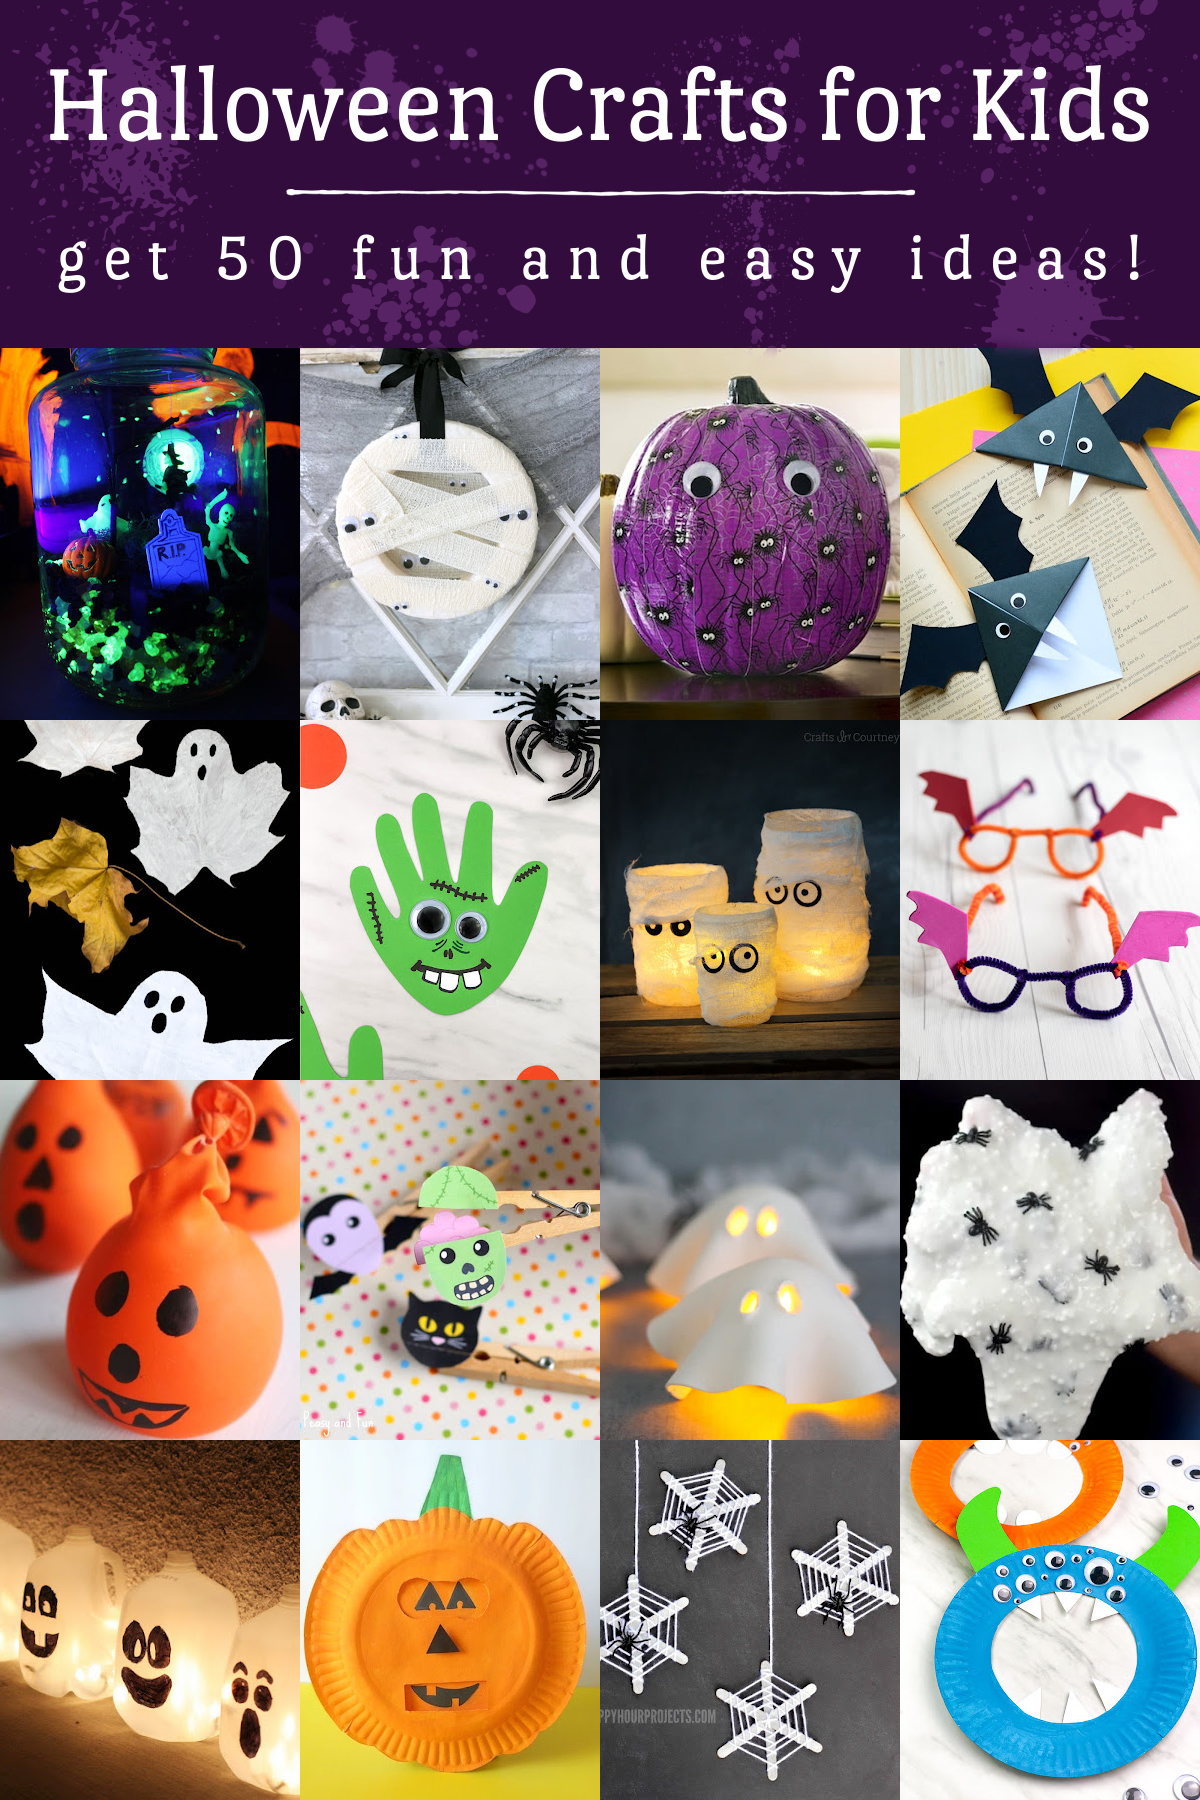 Halloween Crafts for Kids they'll love